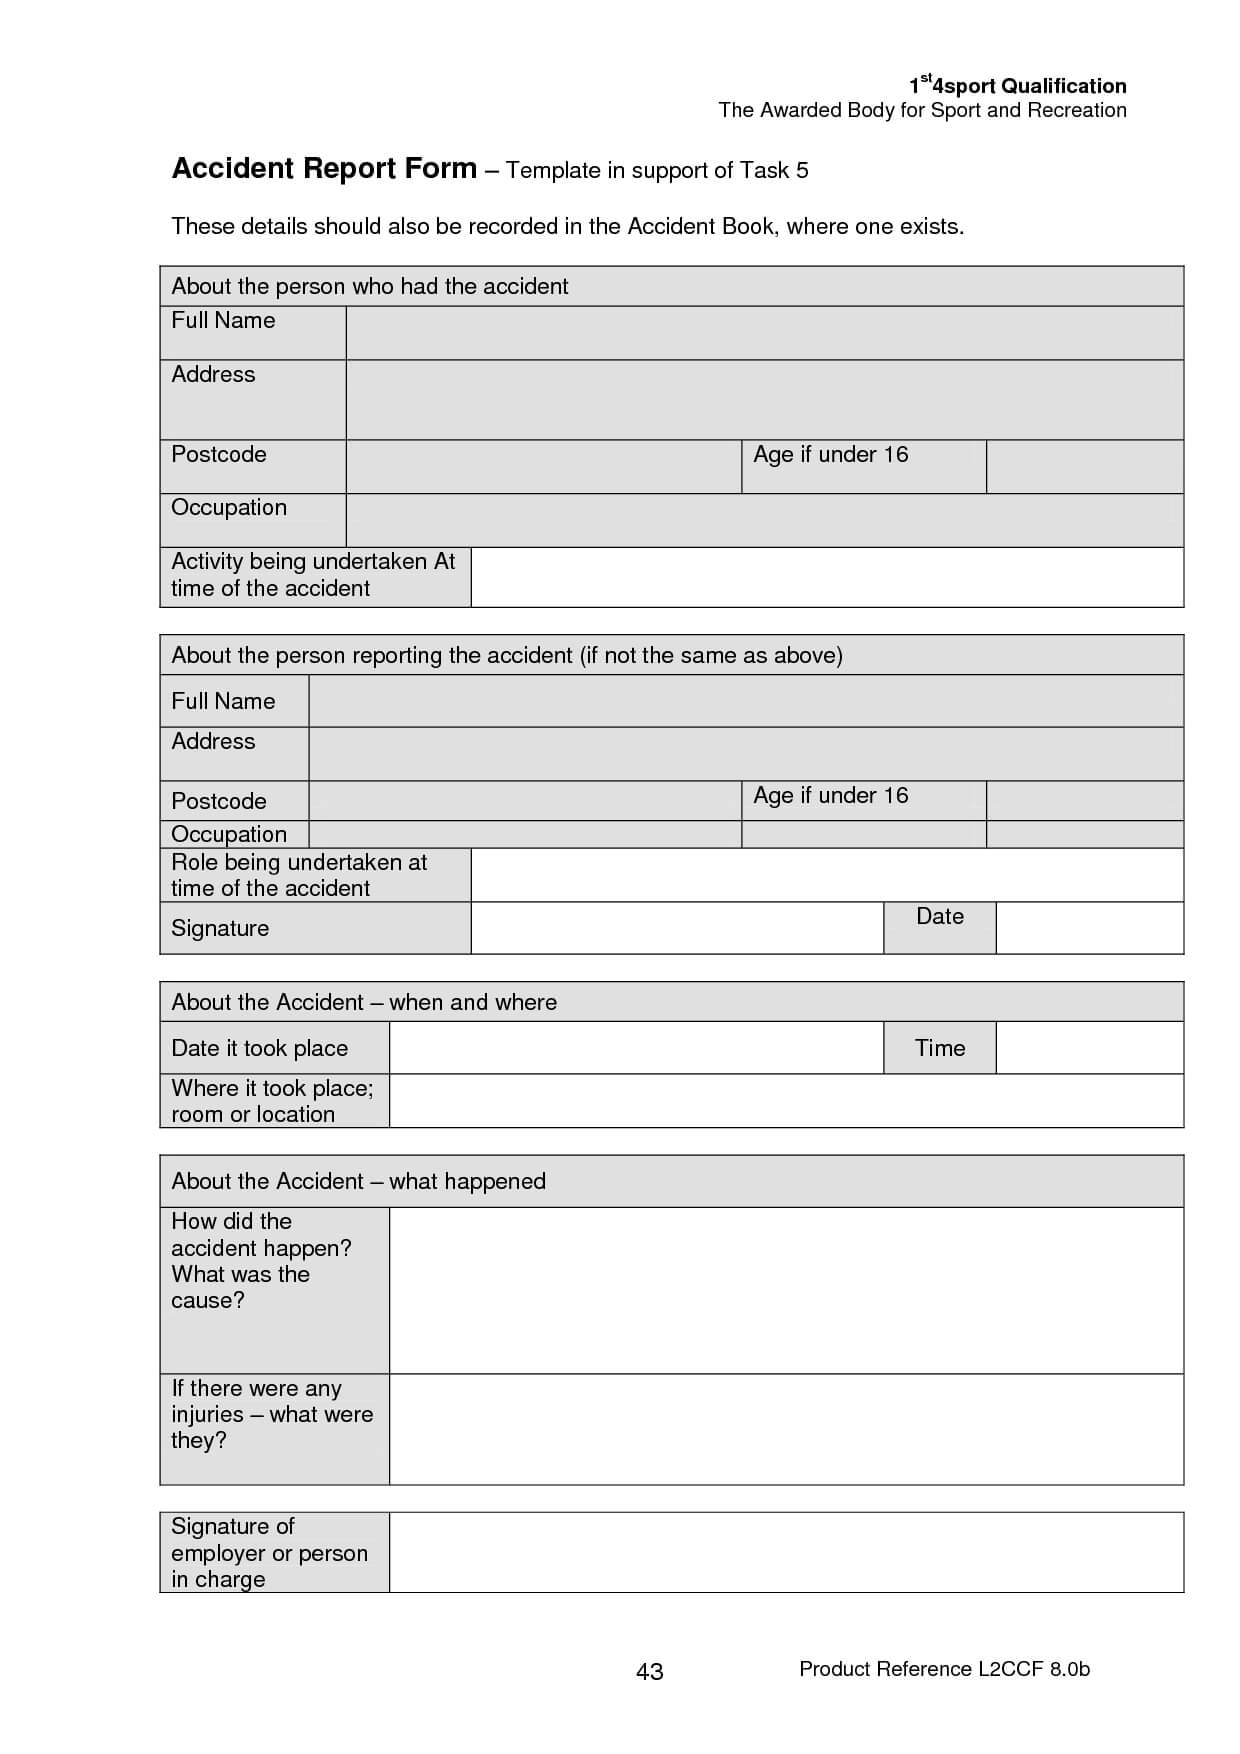 017 Accident Report Form Template 290045 Auto Best Ideas Pertaining To Vehicle Accident Report Form Template